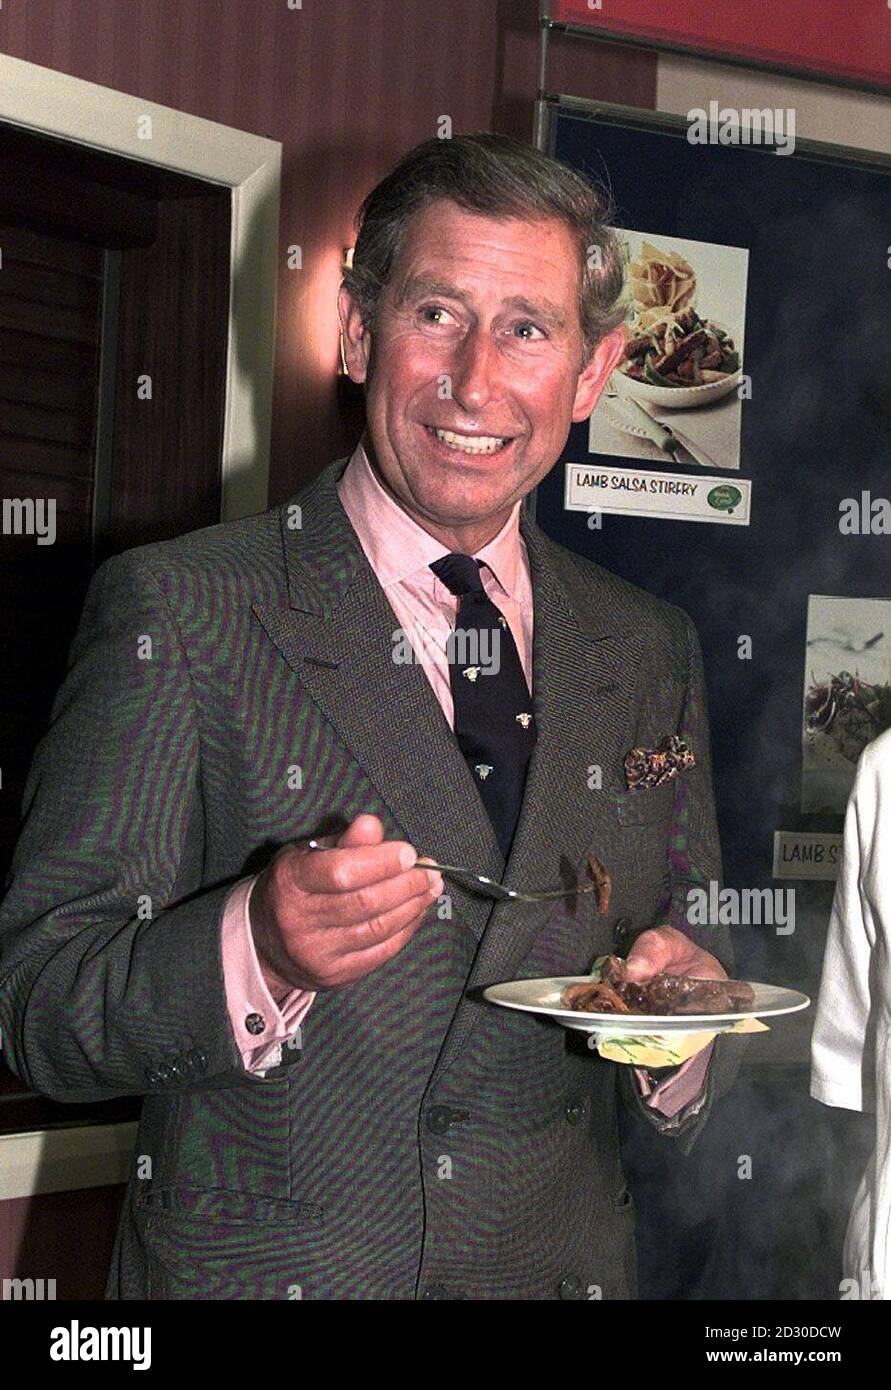 The Prince of Wales enjoyed a plate of lamb stir fry during a visit to the Royal Welsh Show ground in Builth Wells, mid Wales. * The Prince was promoting the Meat and Livestock Commission's 'Quick lamb' campaign to boost sales of British lamb and widen its appeal to consumers. SEE PA story ROYAL Sheep. **EDI** WPA/PA Picture DAVID JONES. Stock Photo